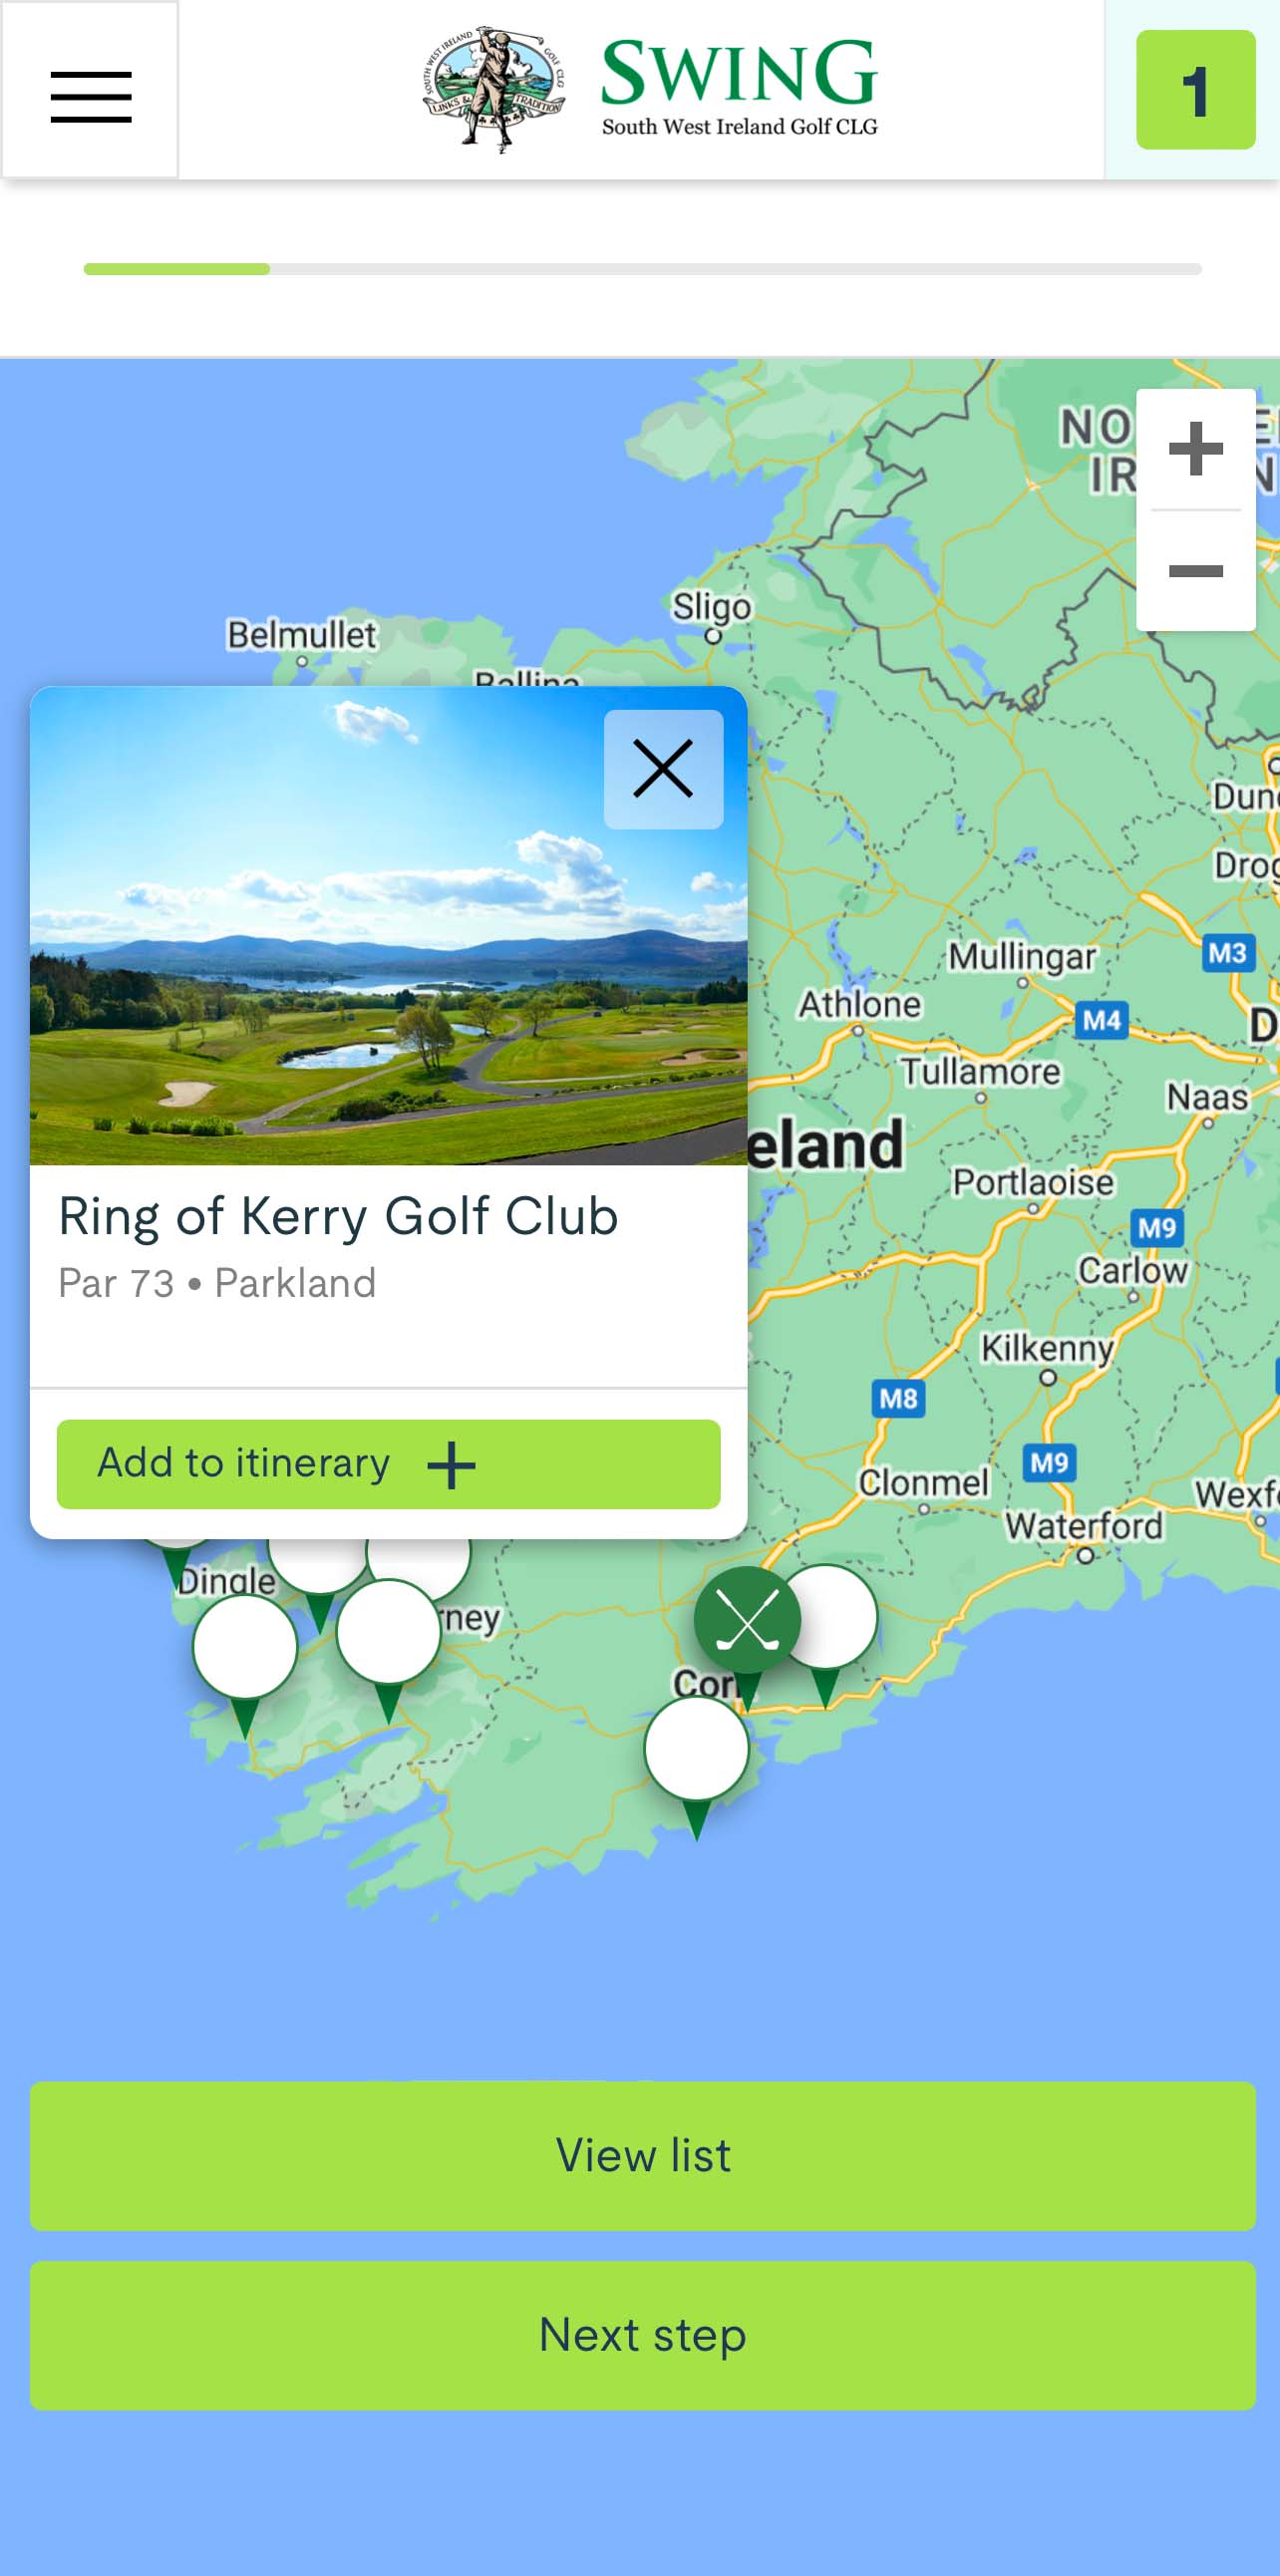 SWING Golf Mobile Web Design Tour Planner Showing Golf Course